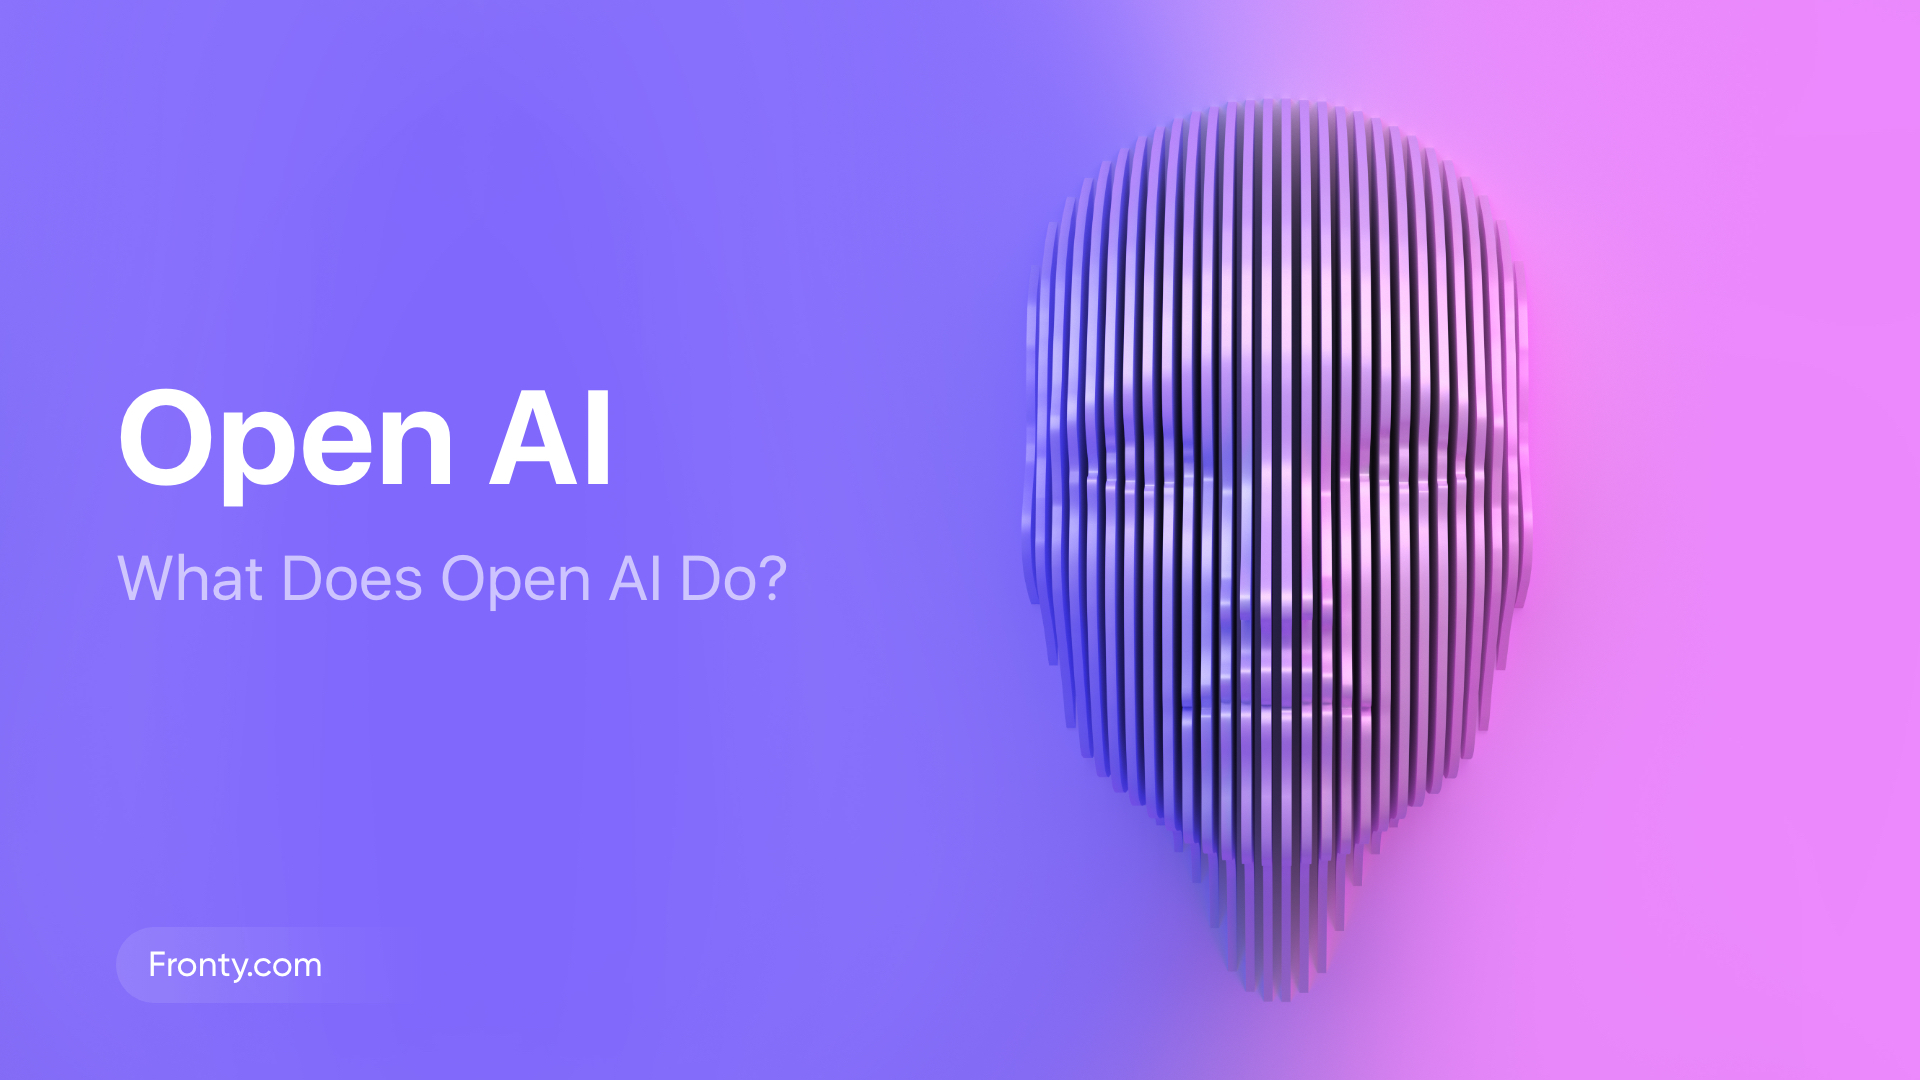 What is Open AI? - Fronty